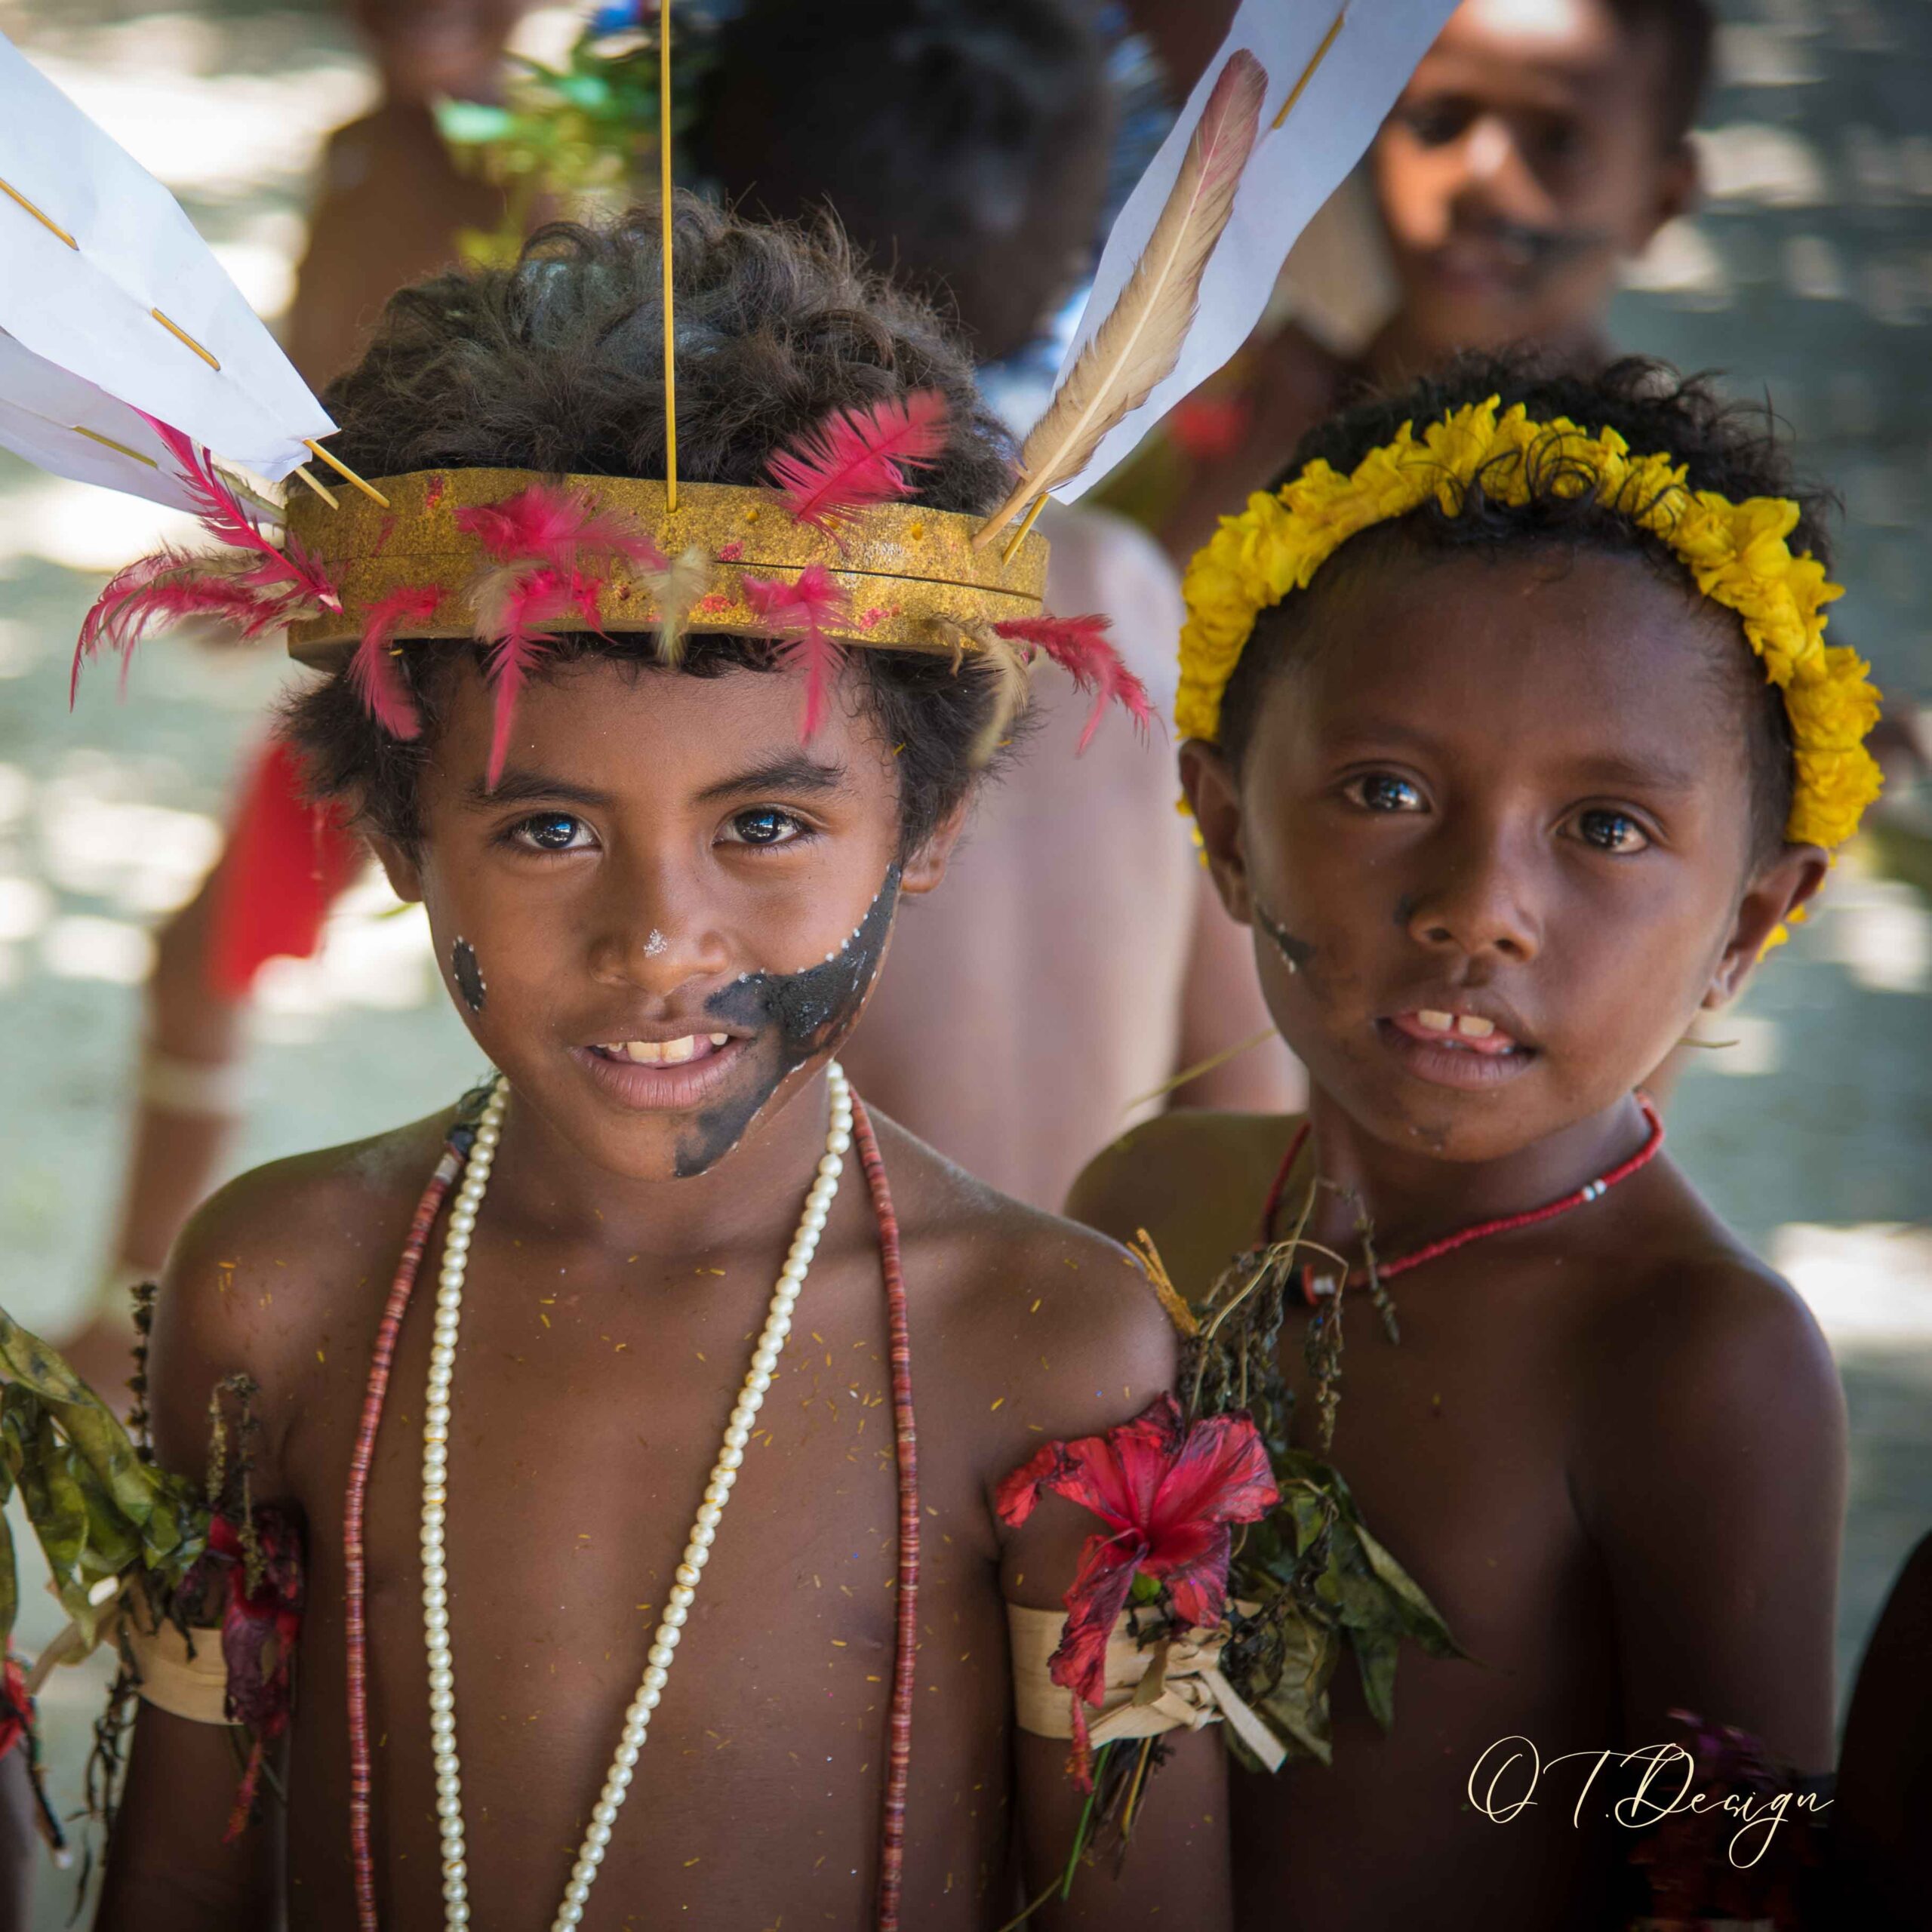 Two local kids wearing traditional accessories, such as pearls and feathers to their heads and necks, in Kitava Island, Papua New Guinea